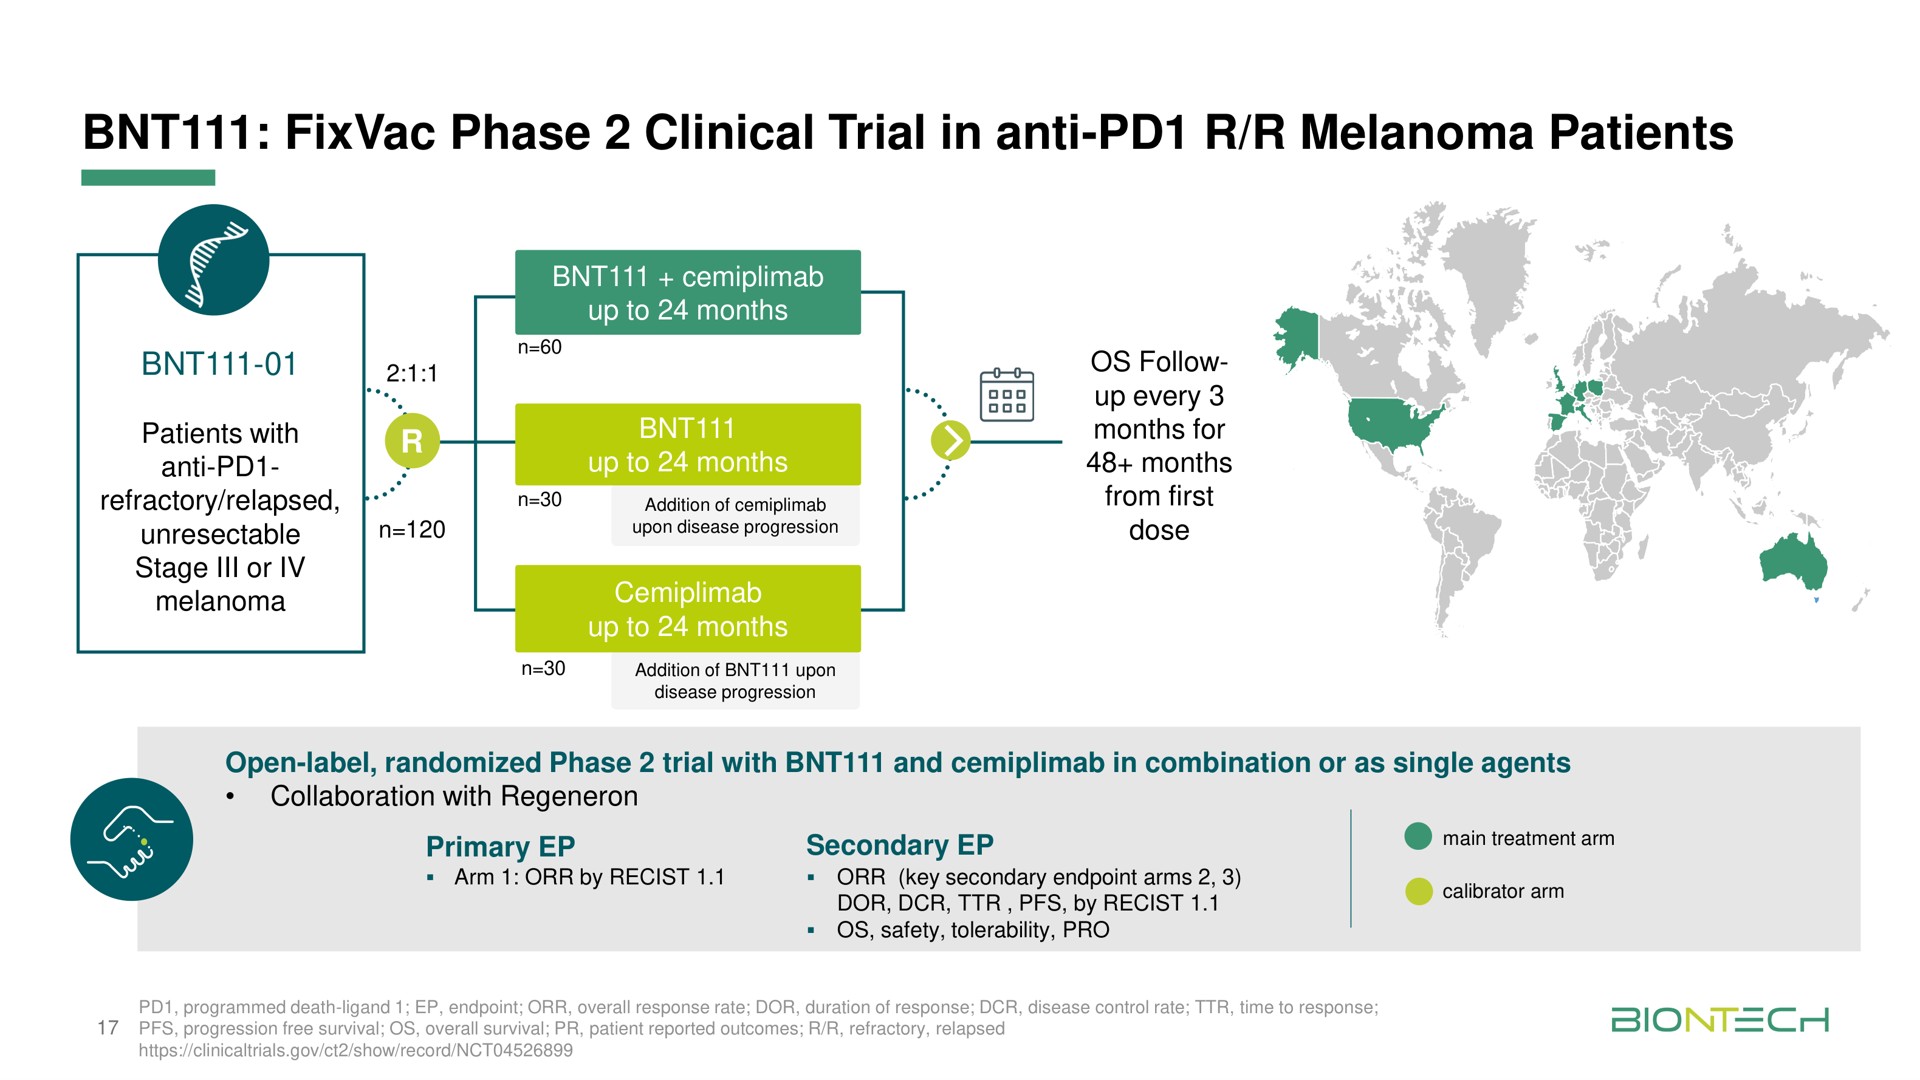 phase clinical trial in anti melanoma patients | BioNTech